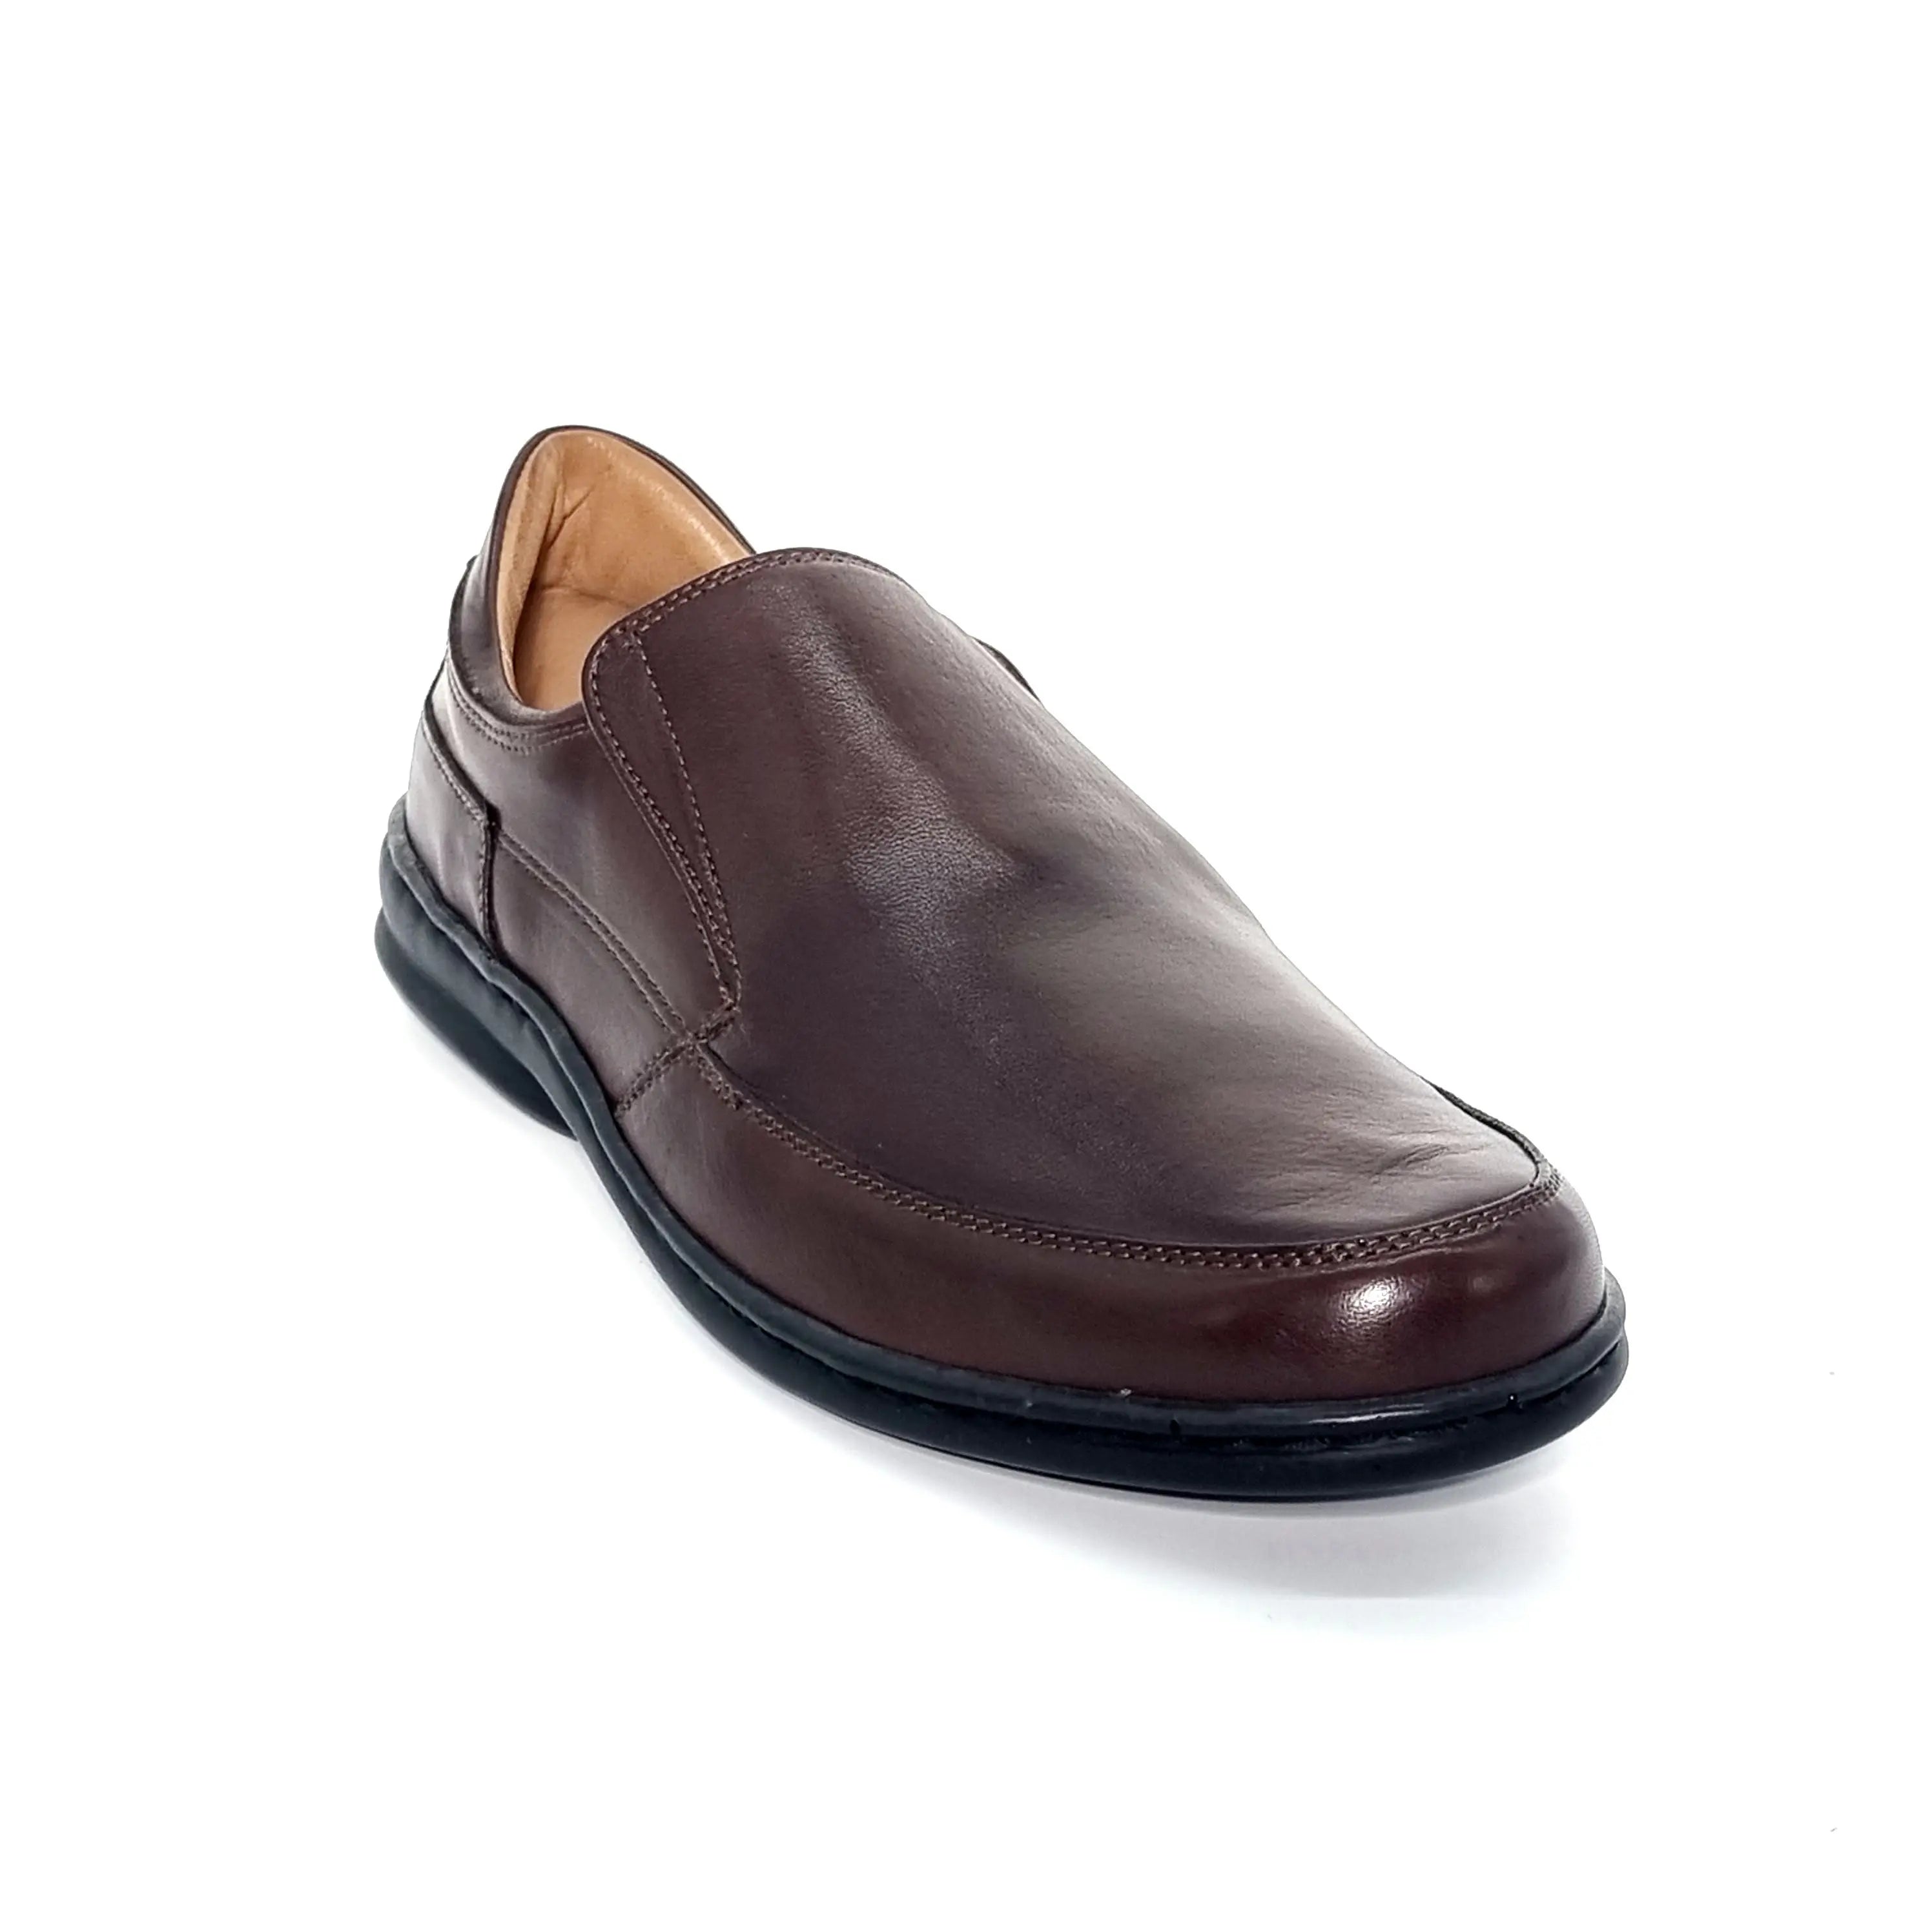 OPA 39503 BROWN Loafers | familyshoecentre